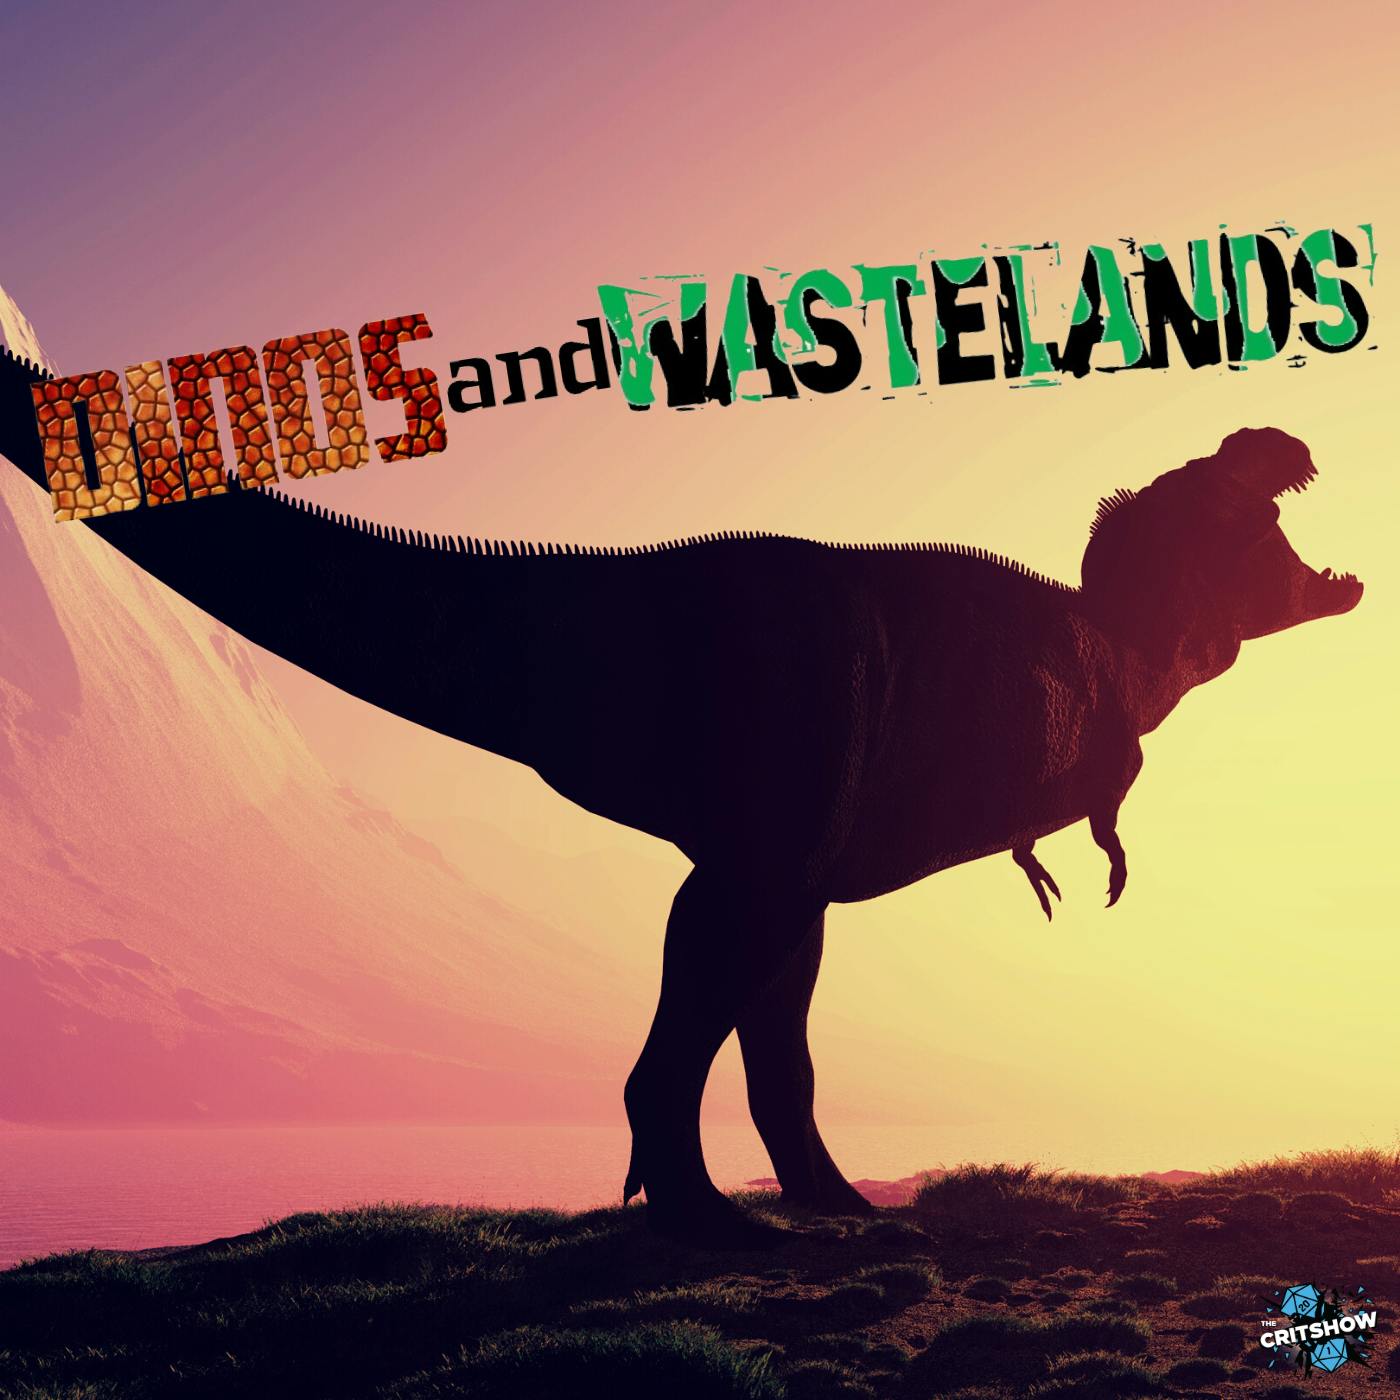 Dinos and Wastelands